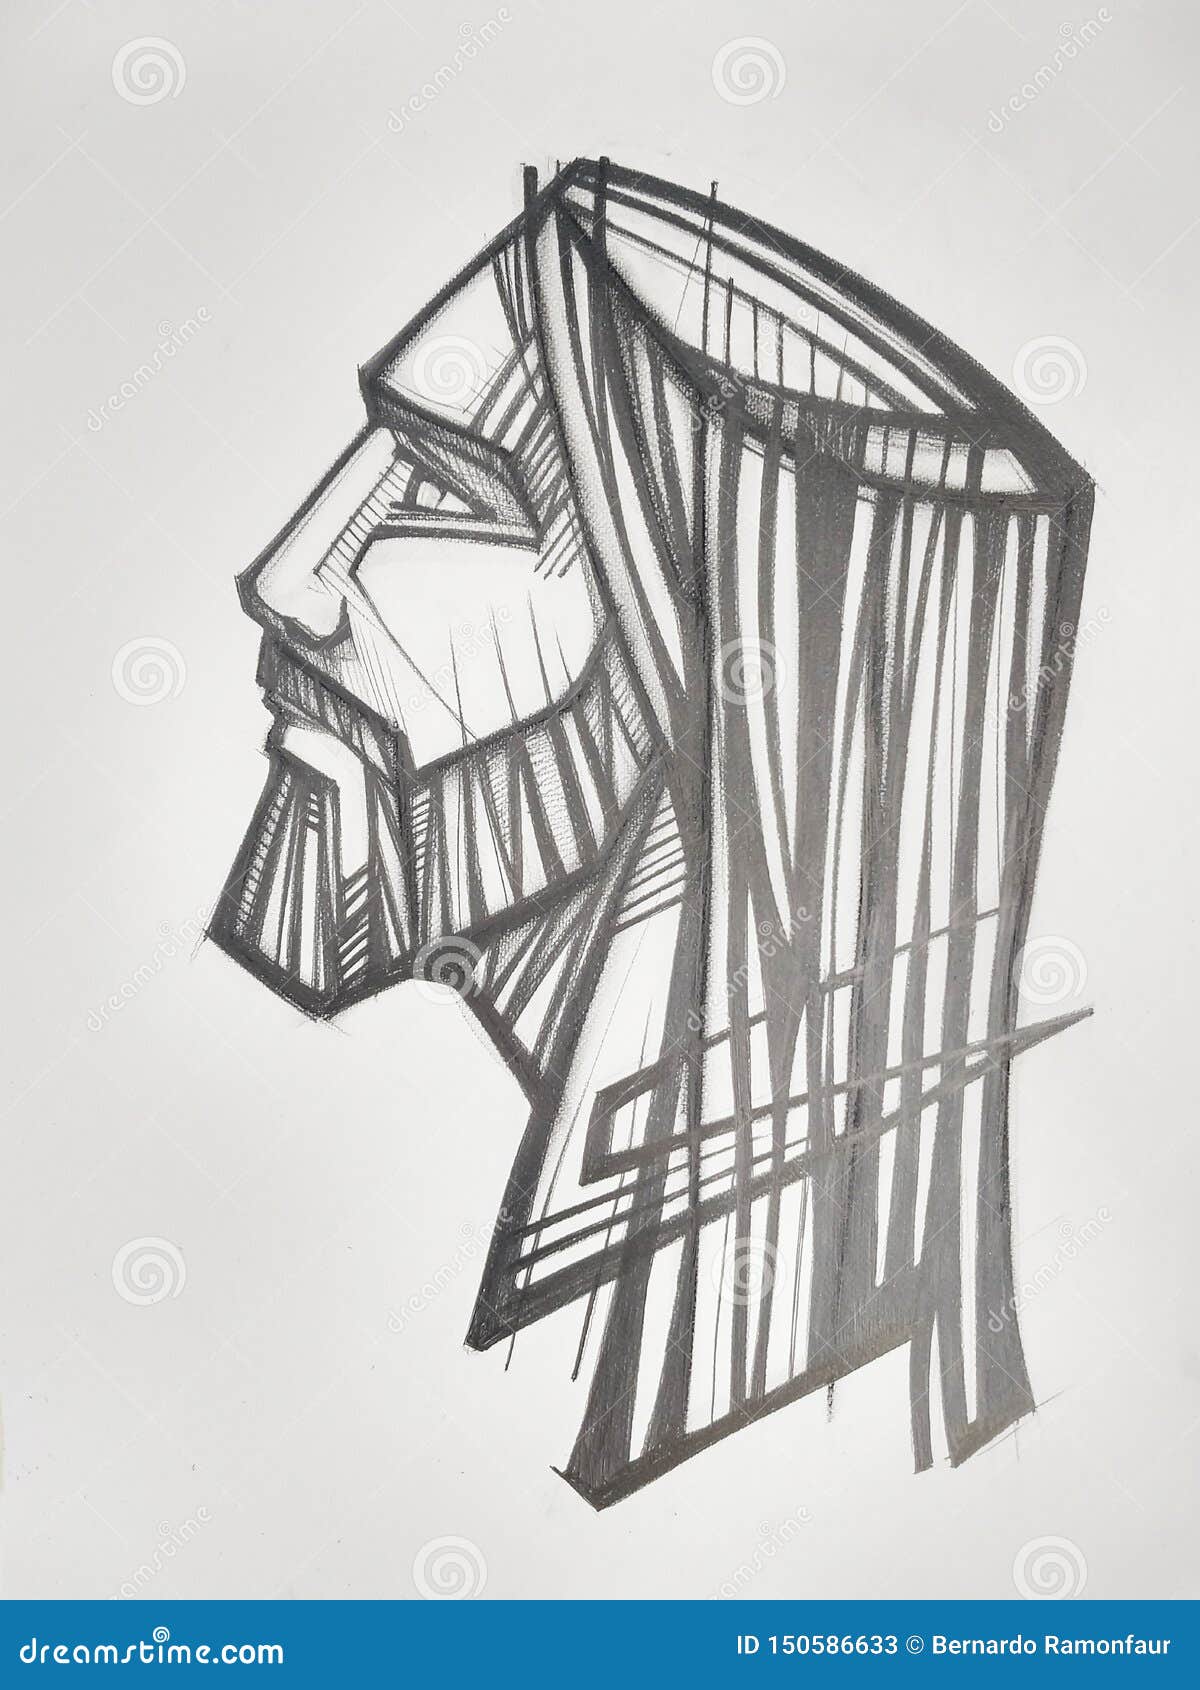 Jesus Christ Face Pencil And Charcoal Drawing Stock Illustration